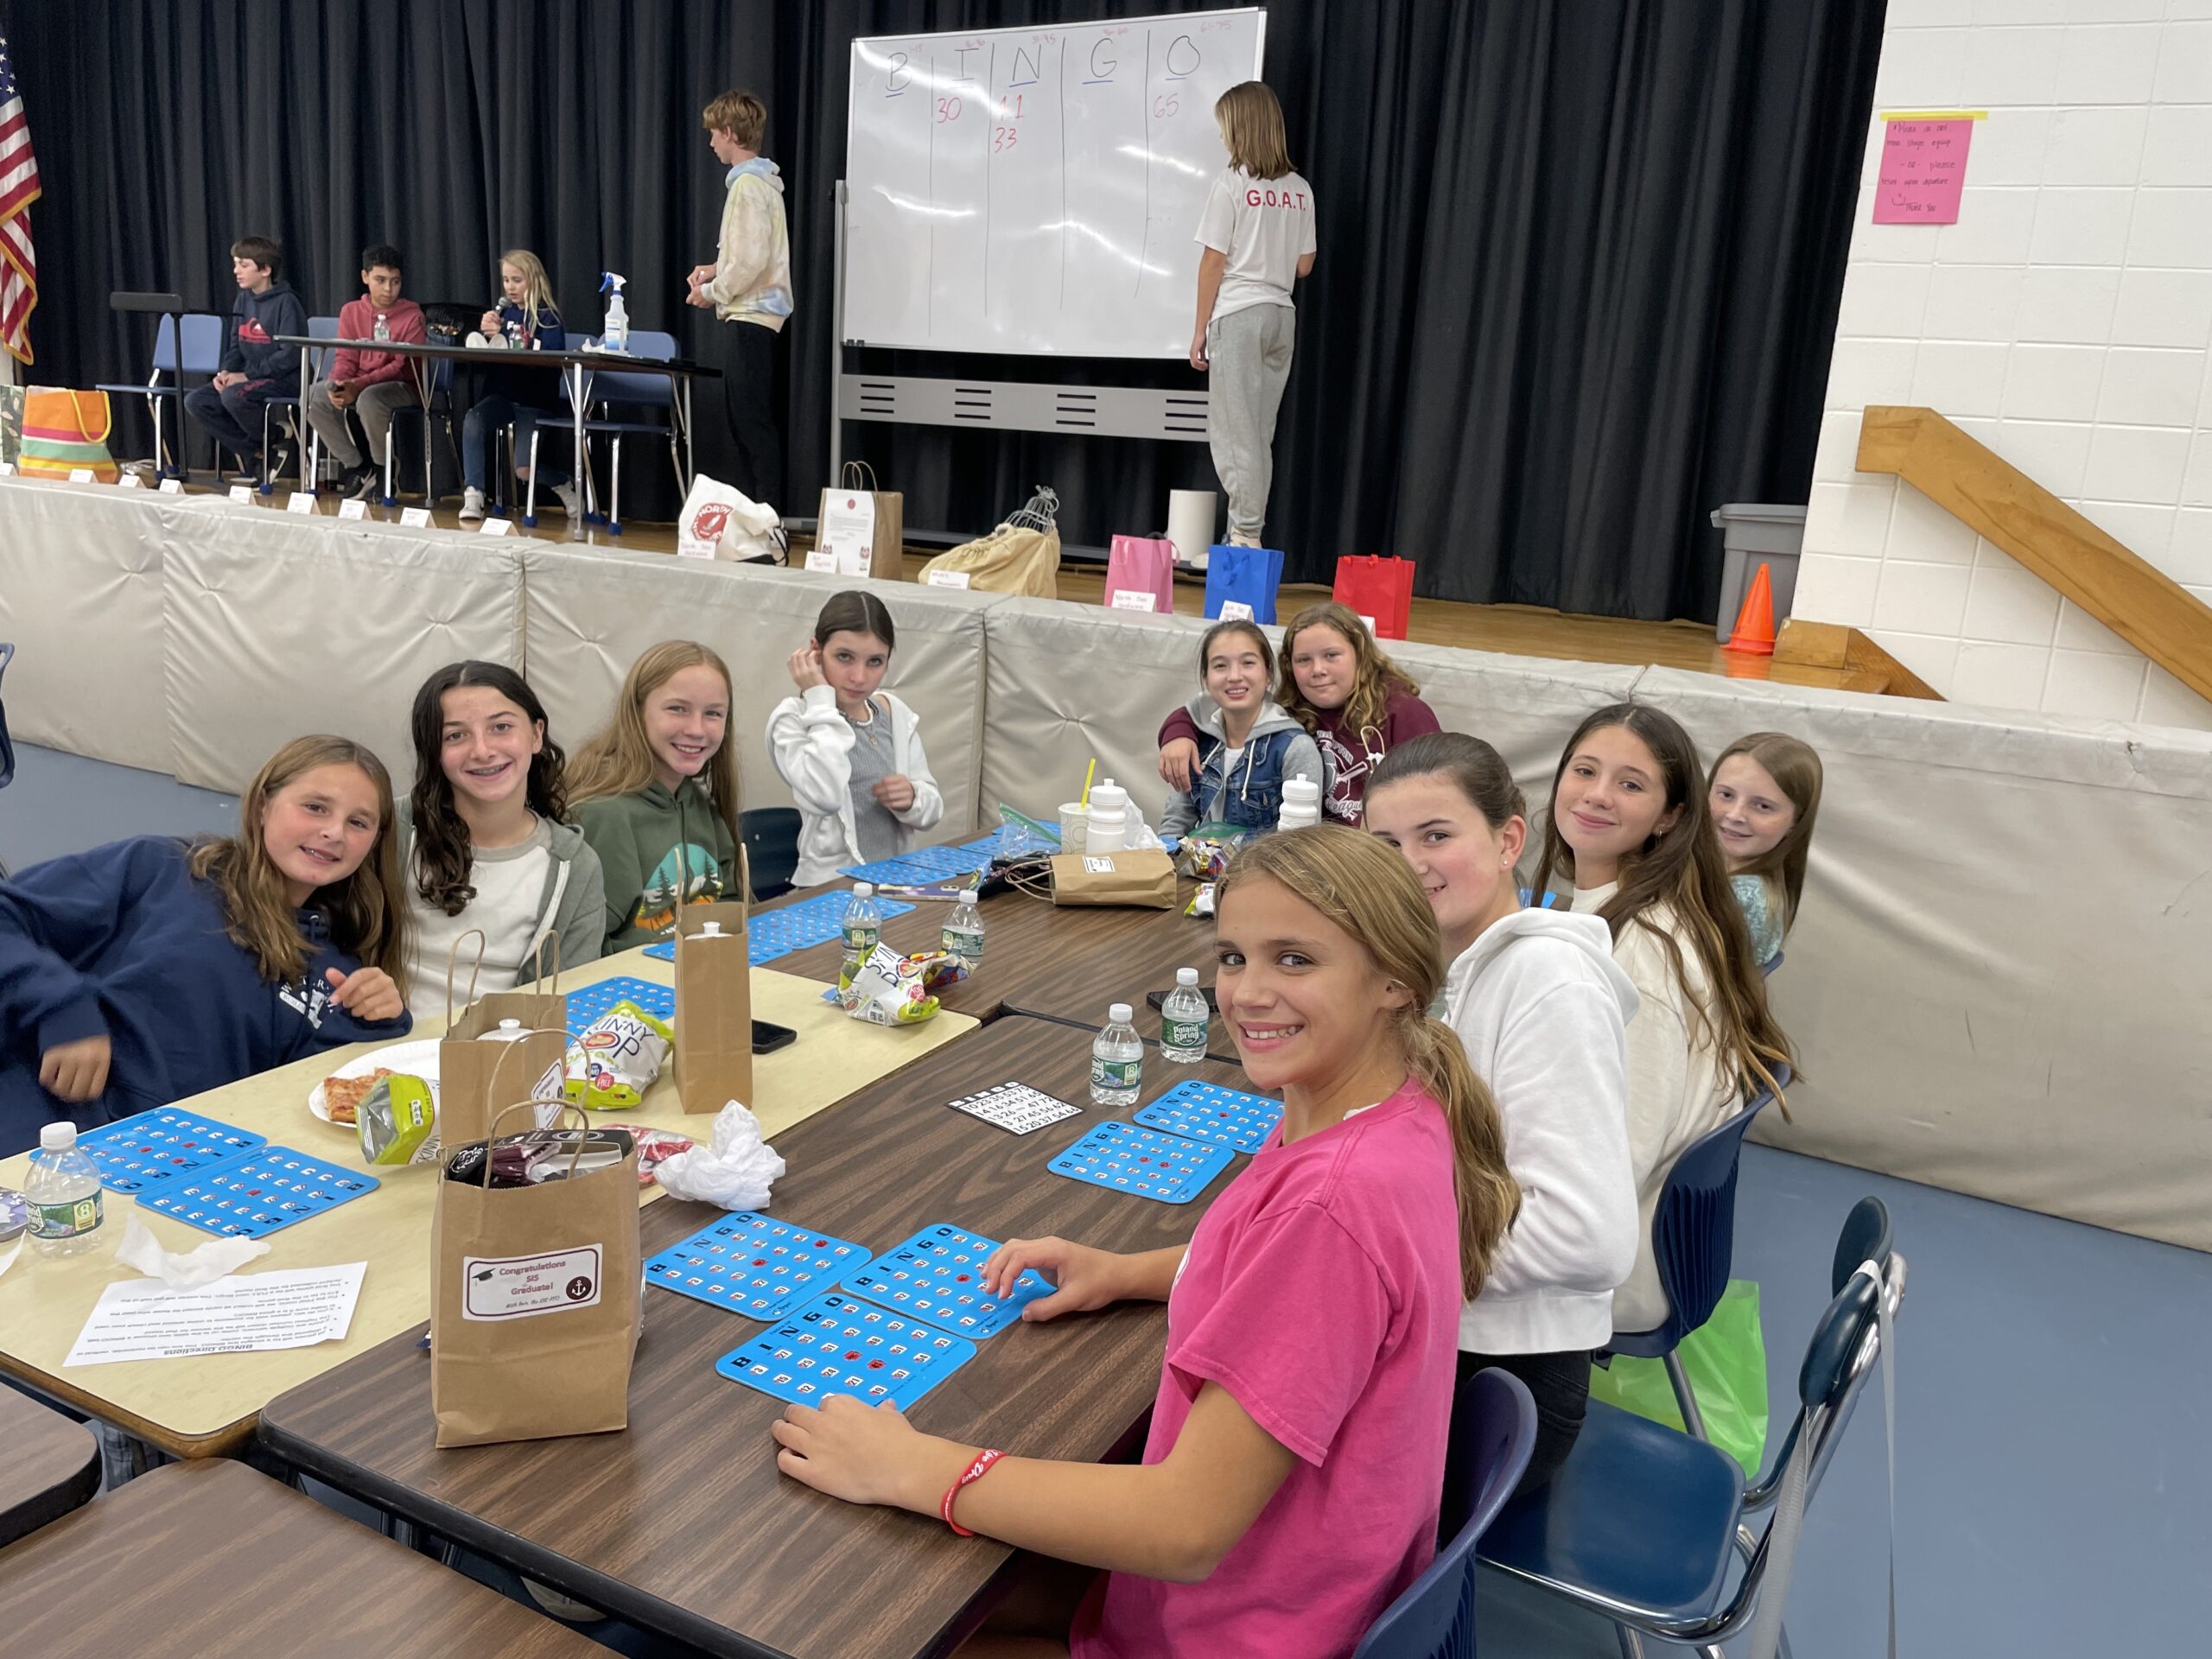 The Southampton Intermediate School PTO recently hosted a successful night of bingo for the school’s students and their families. Prizes were donated by local businesses, including Flying Point, Bamboo Restaurant, Stevenson’s Toys, North Sea Hardware, Catena’s, Fowlers, Topiaire and more. COURTESY SOUTHAMPTON SCHOOL DISTRICT